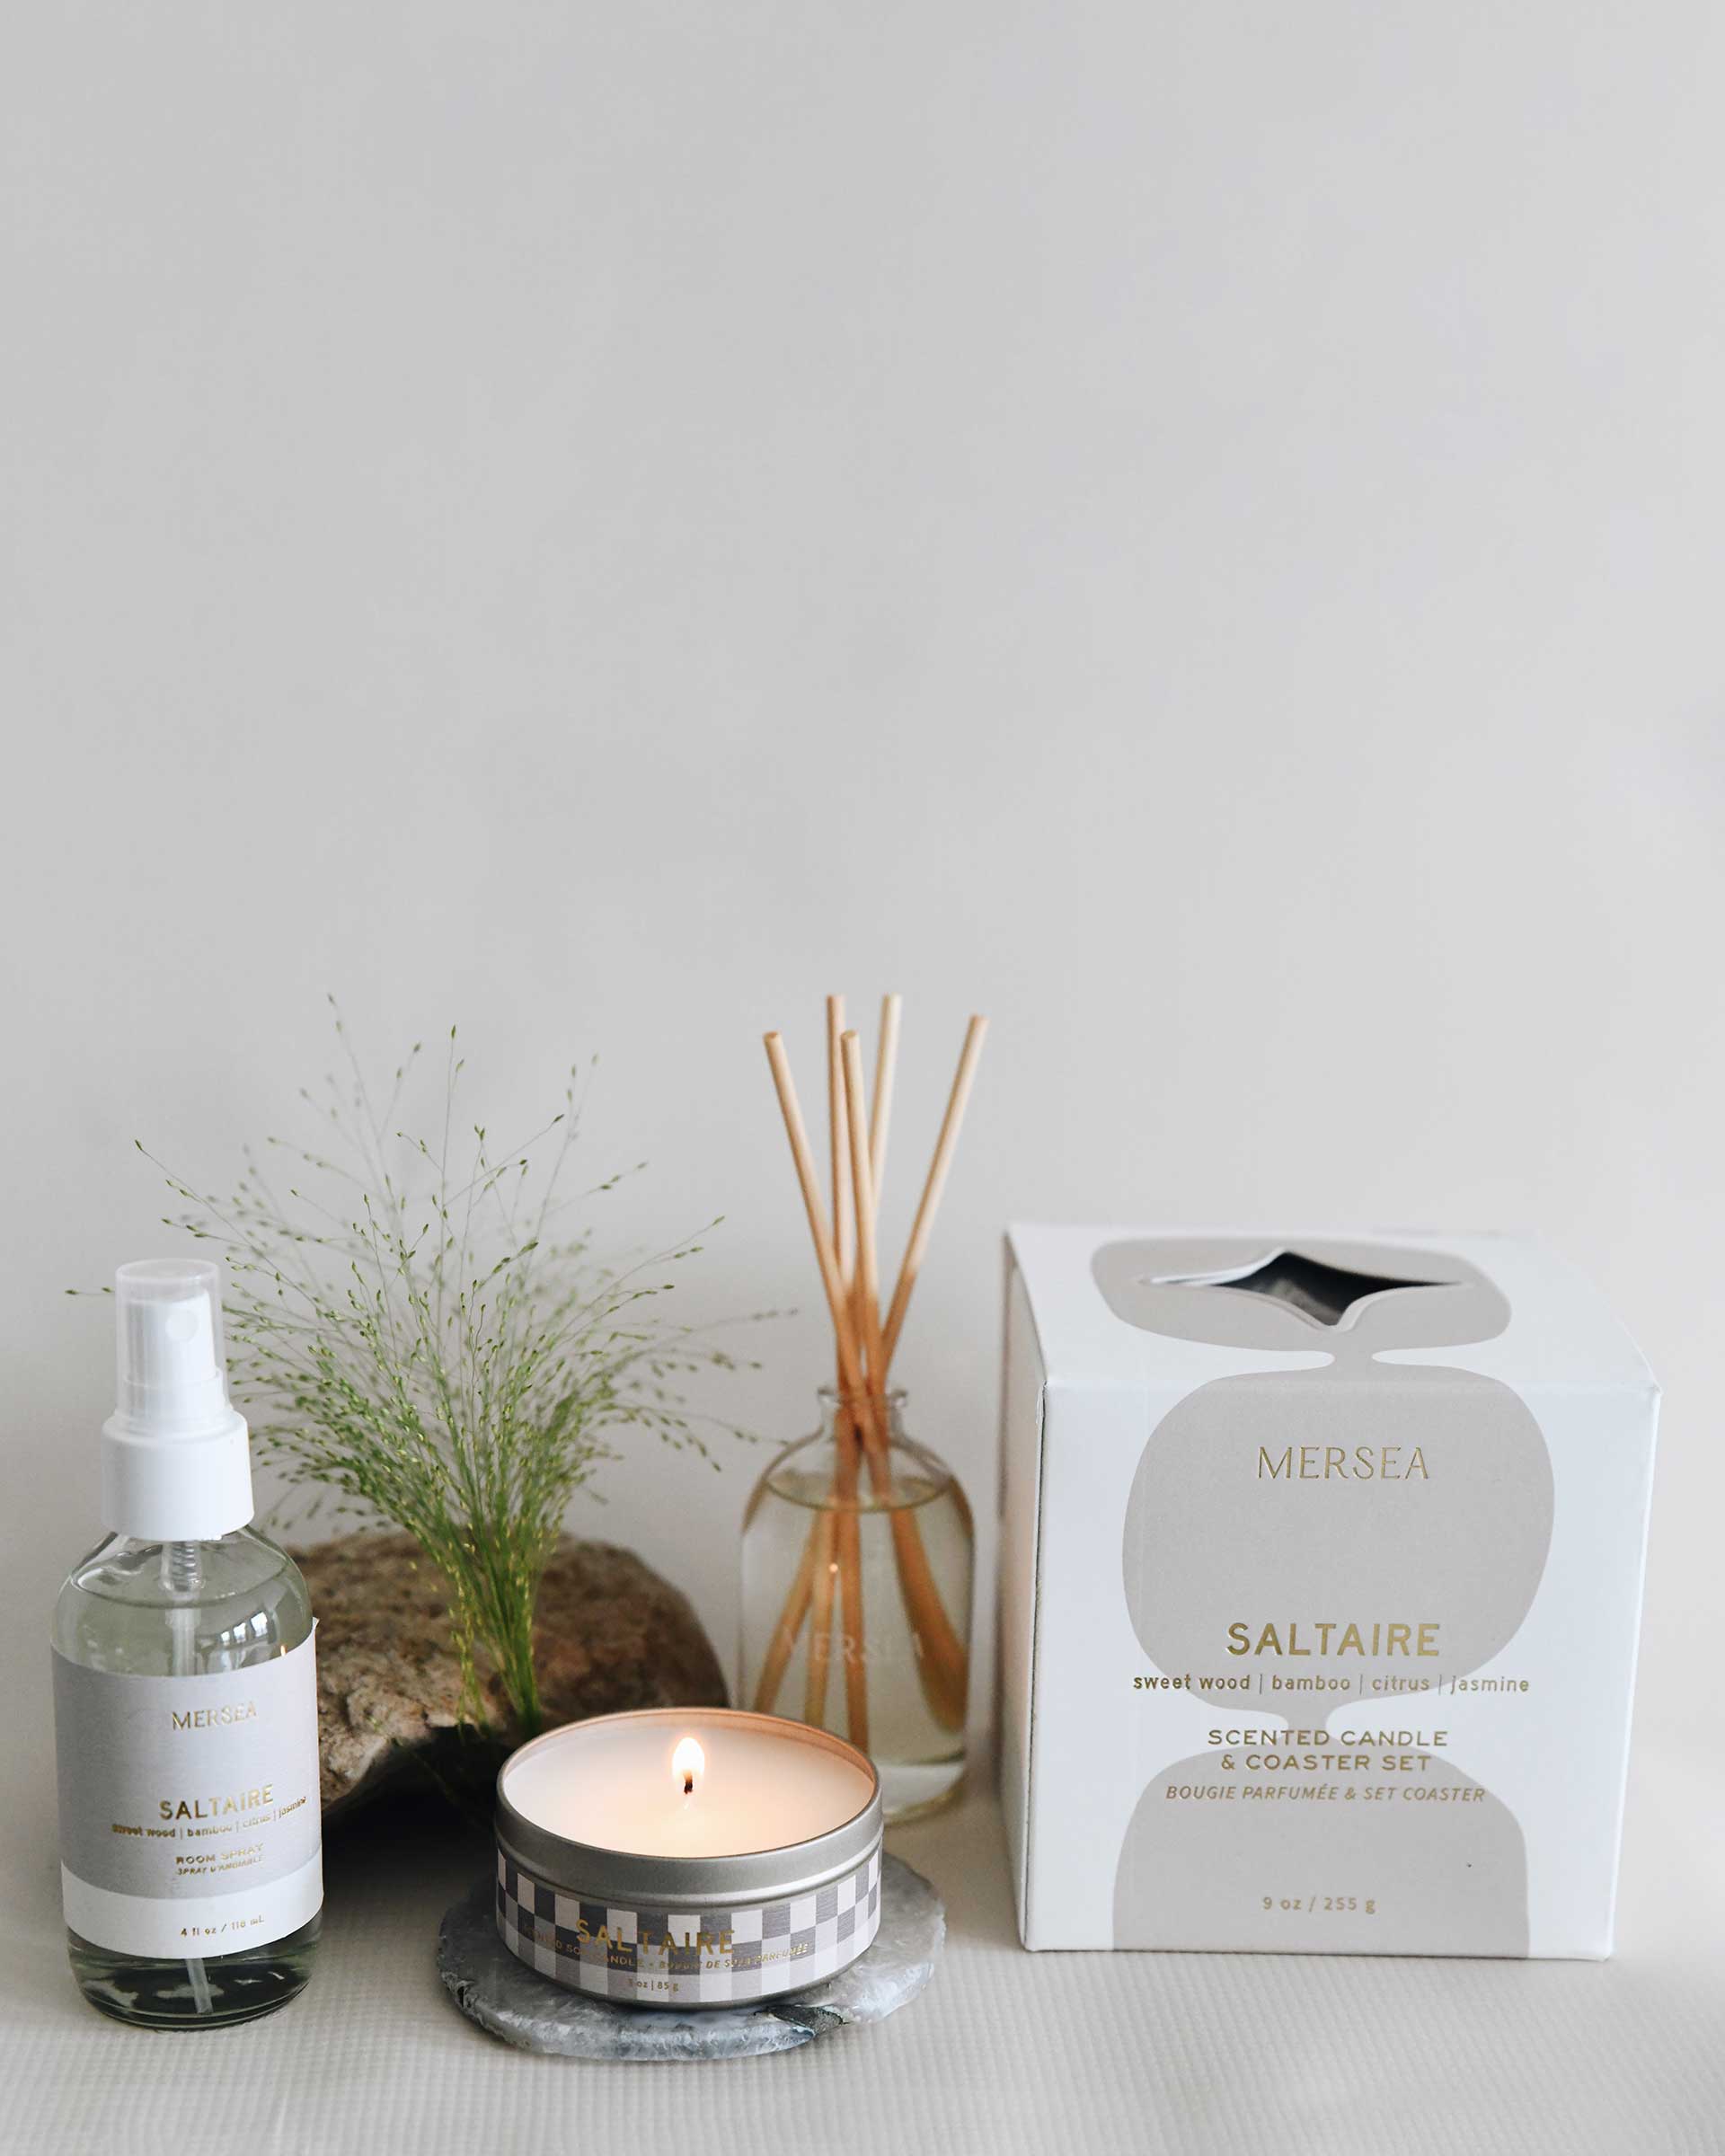 saltaire diffuser, candles, room spray, rock and greenery on a grey background